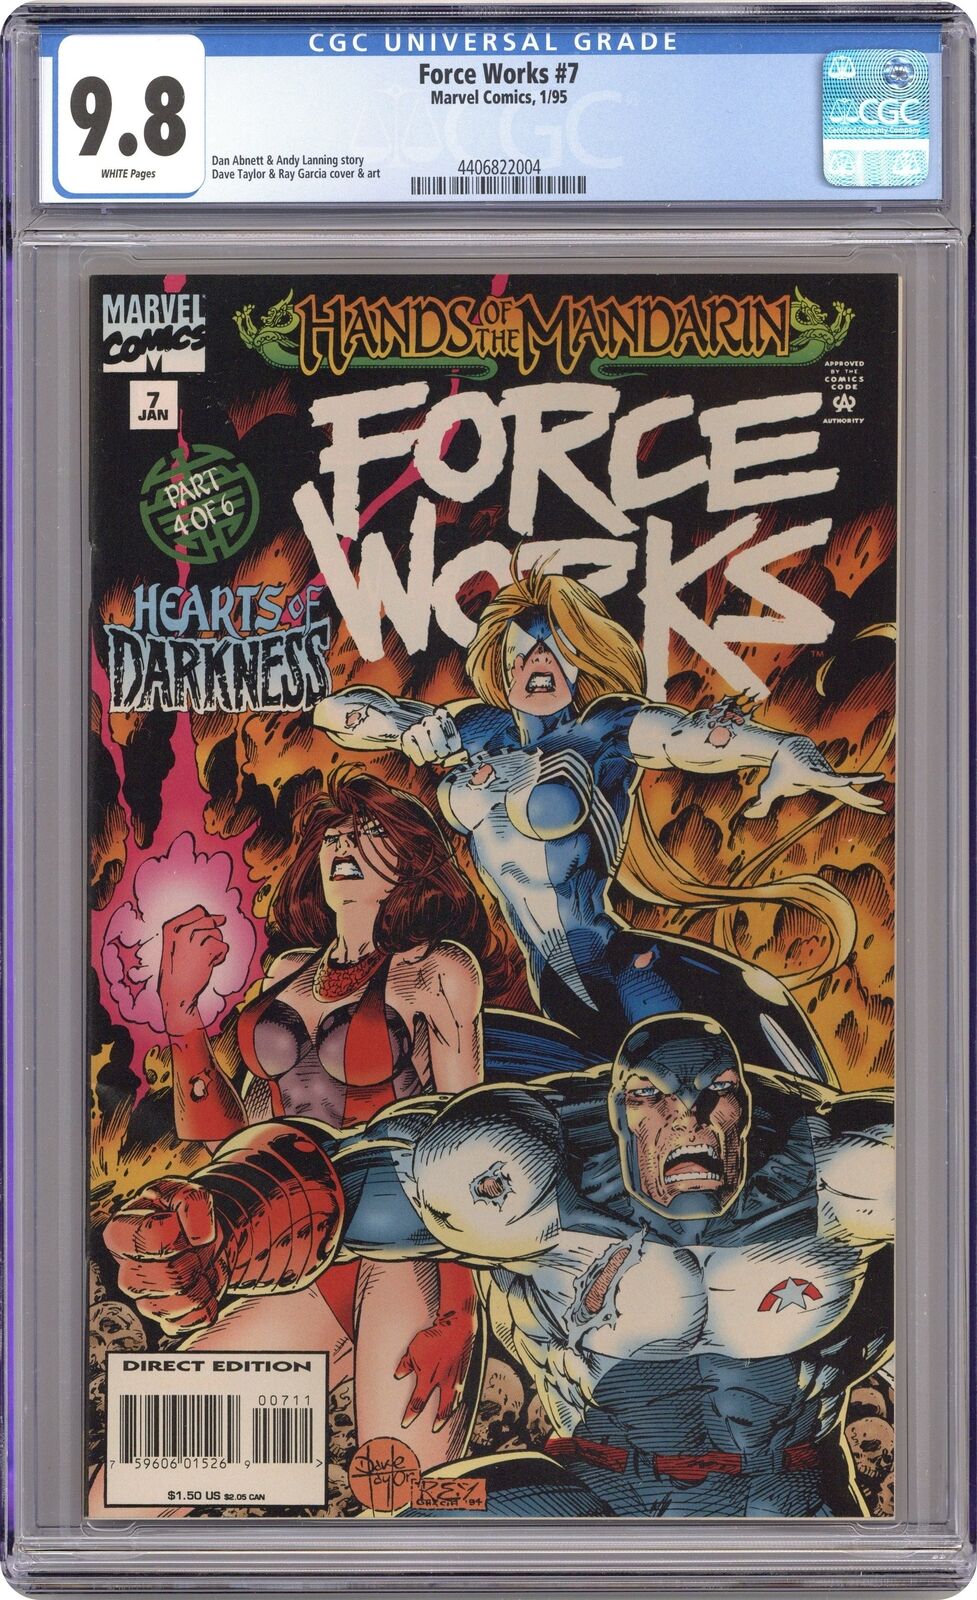 Force Works #7 CGC 9.8 1995 4406822004